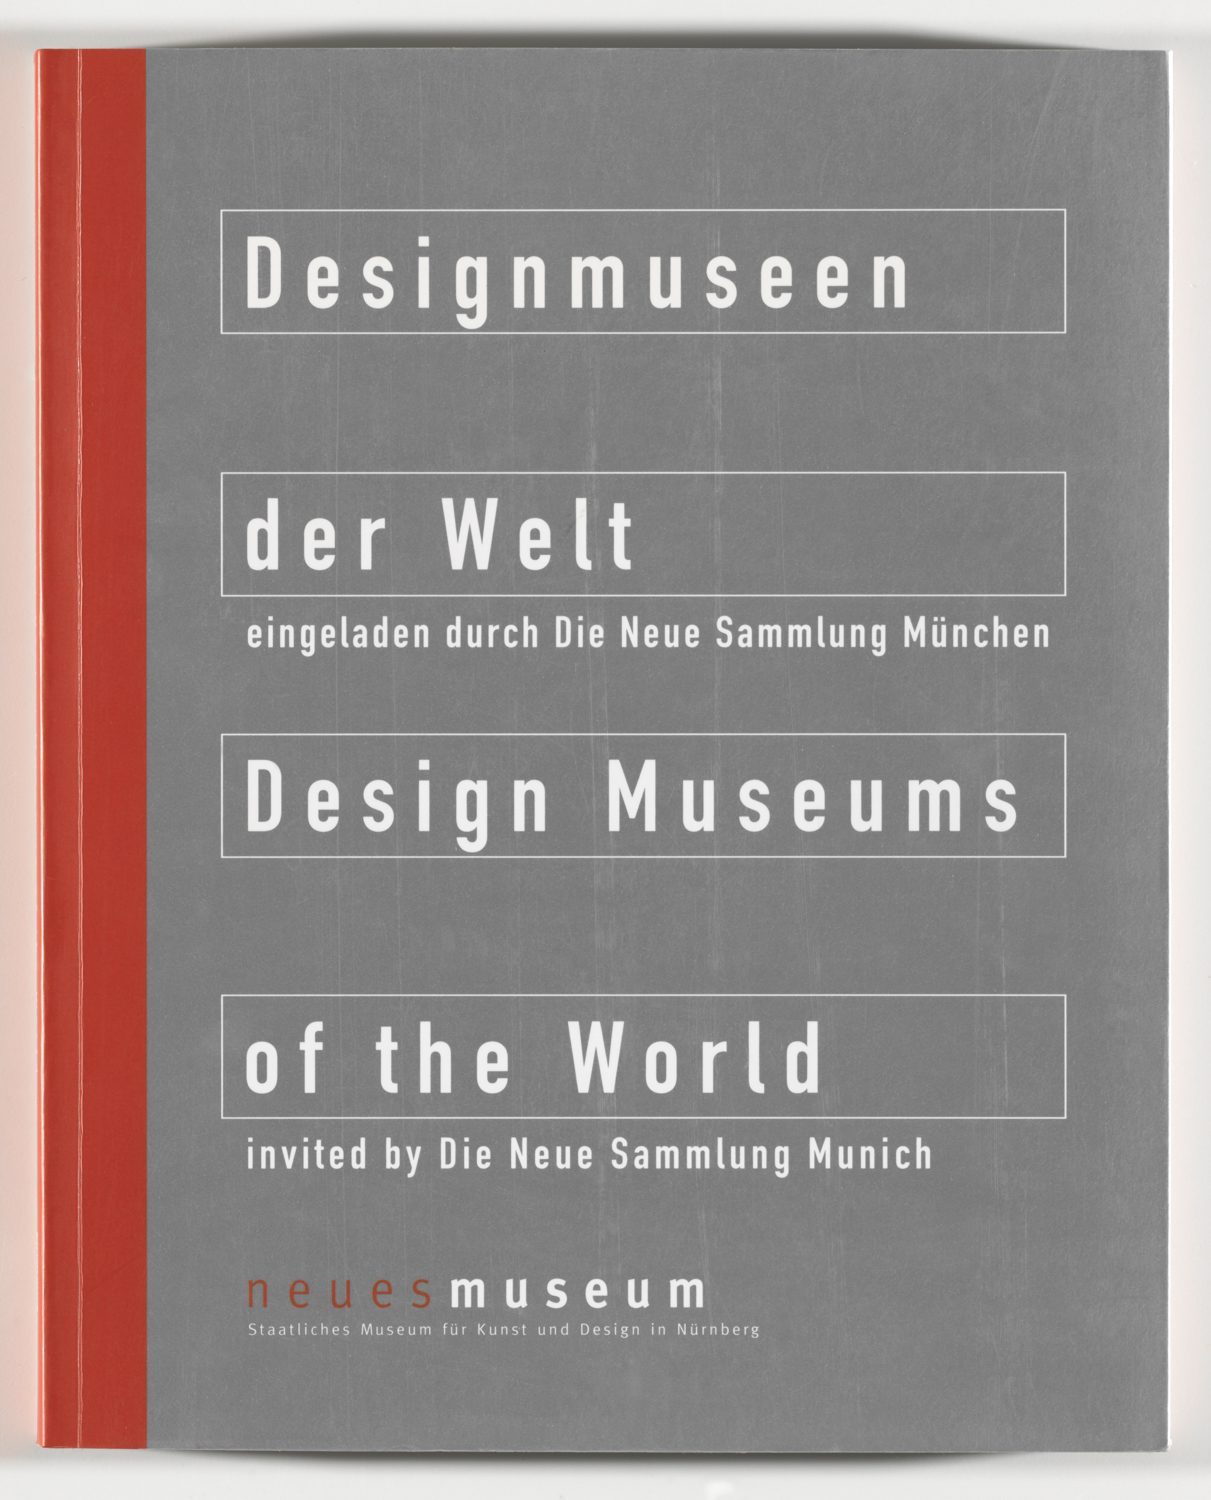 White lettering on a silver-coloured background in white-edged horizontal rectangles: Designmuseen der Welt - Design Museums of the World. On the left vertical red bar running across the spine. Lettering at the bottom: in red new, in white museum.